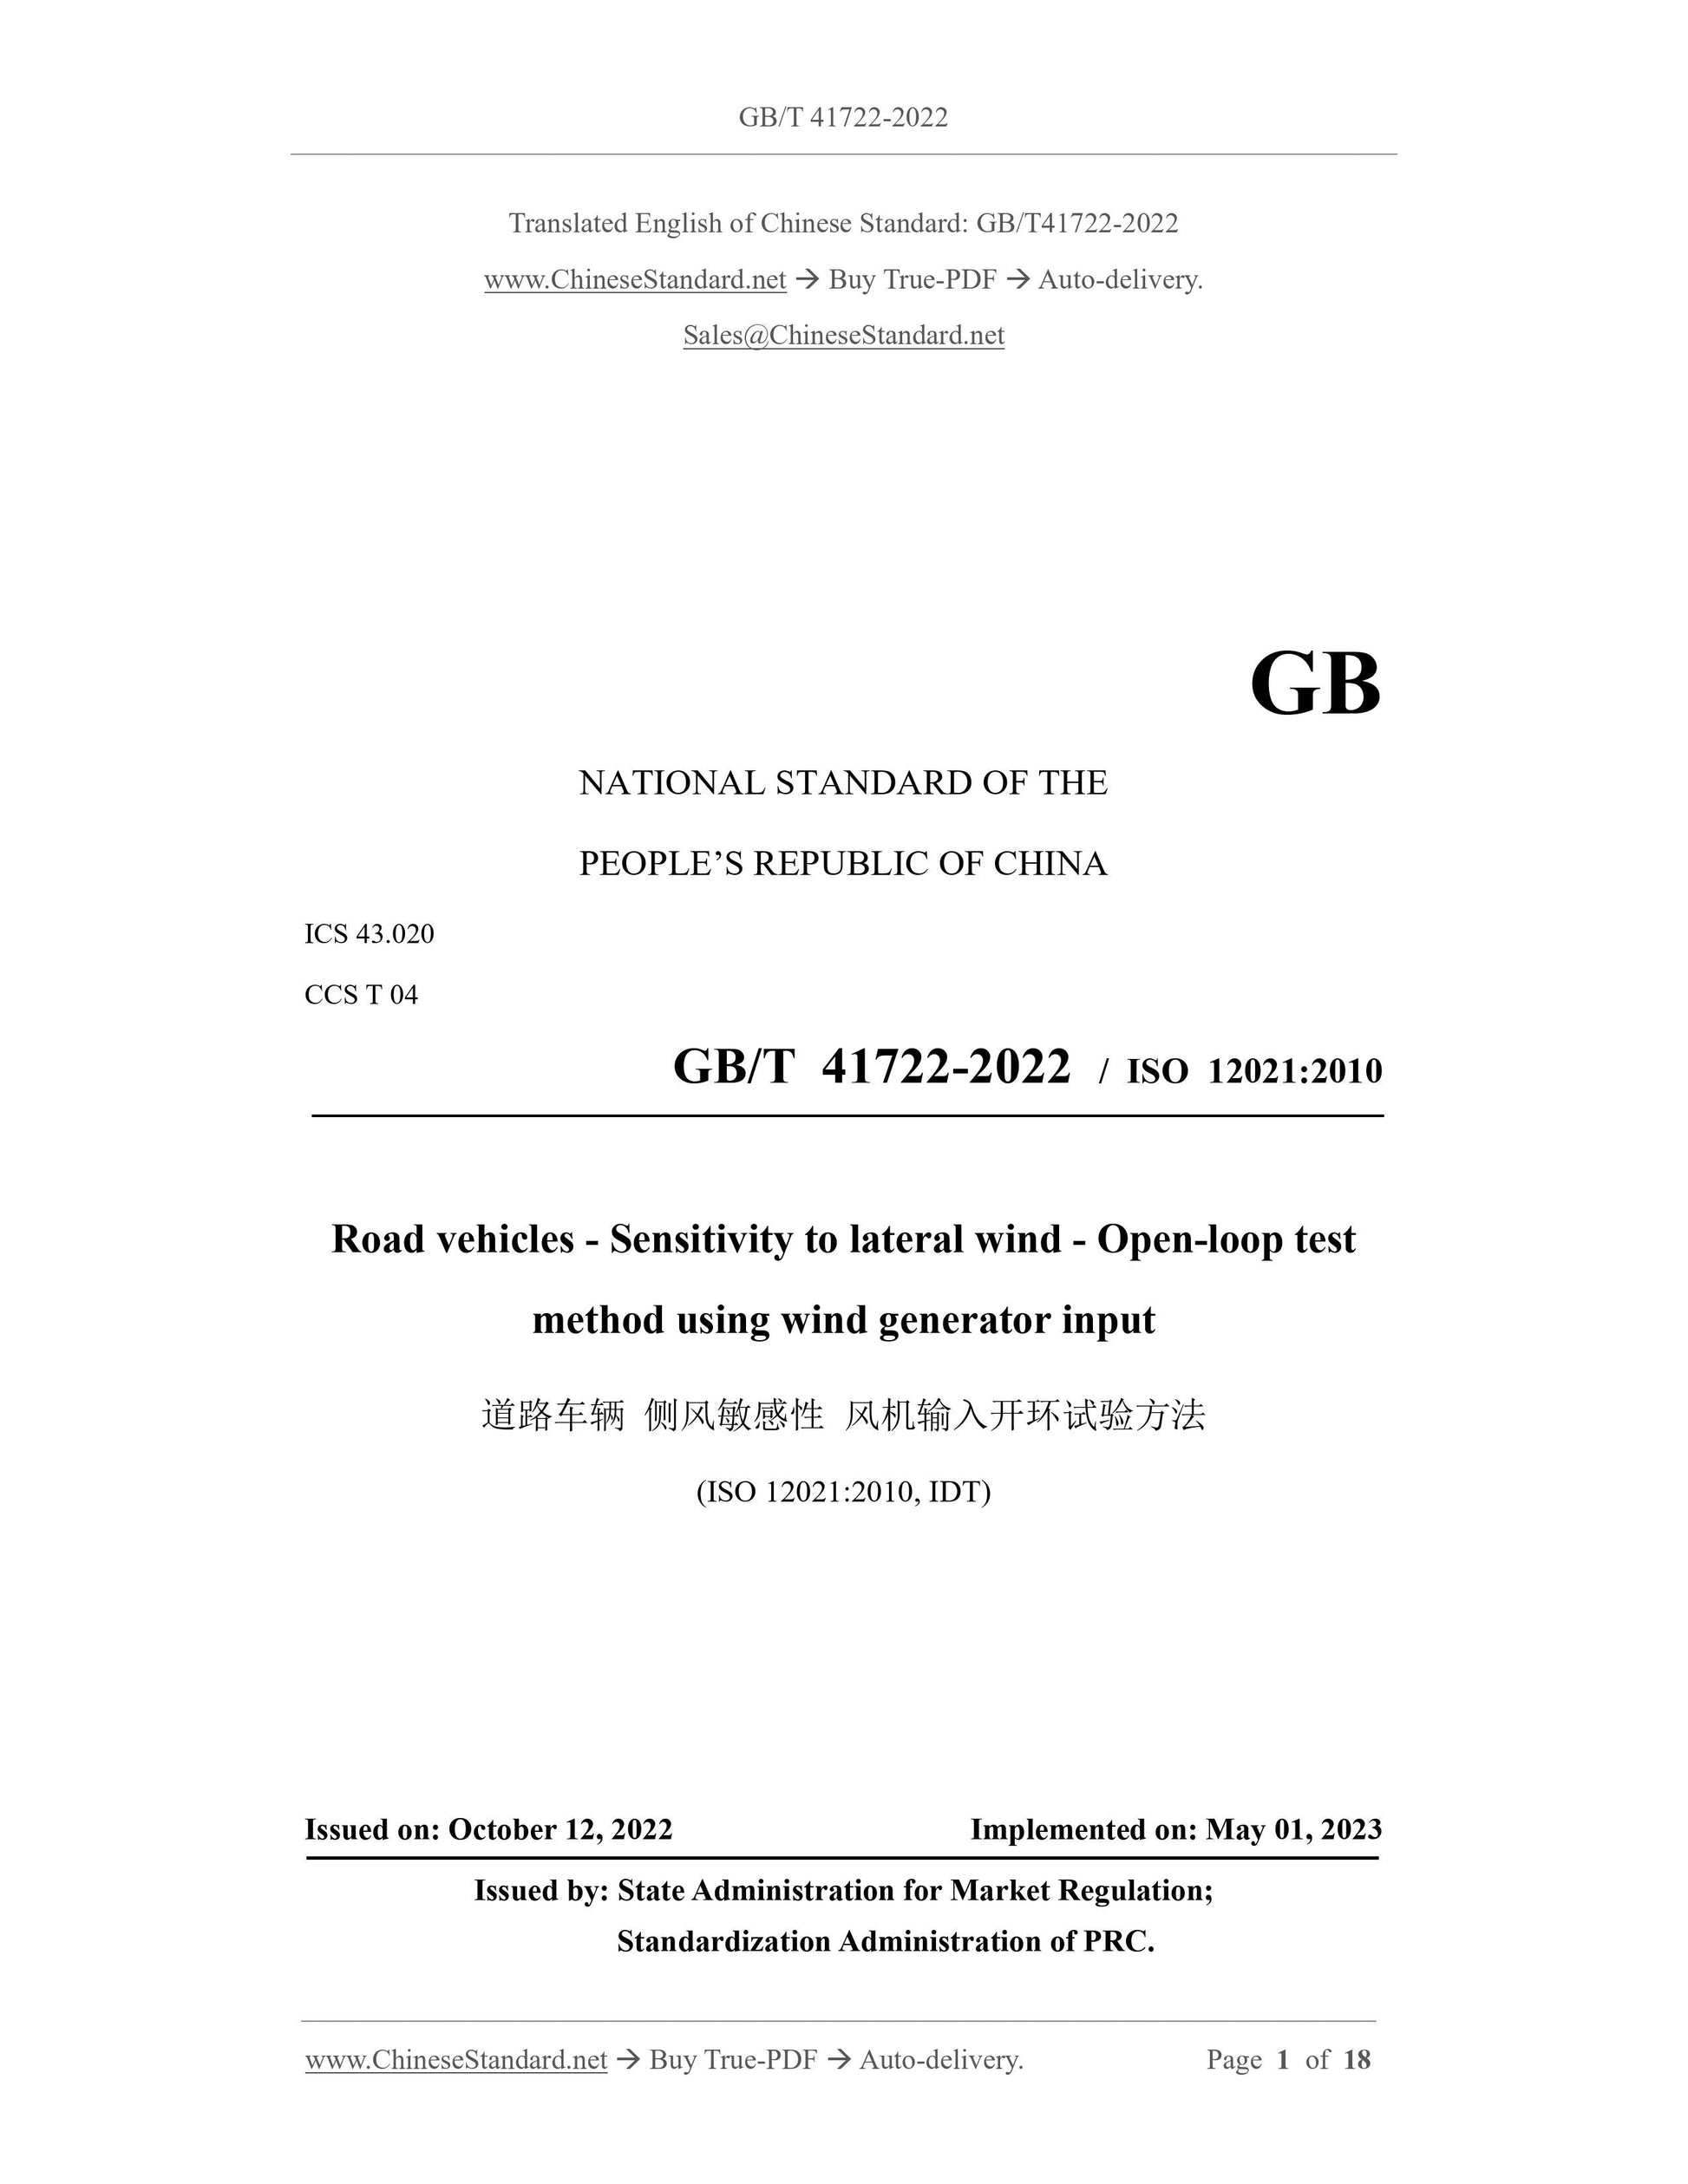 GB/T 41722-2022 Page 1